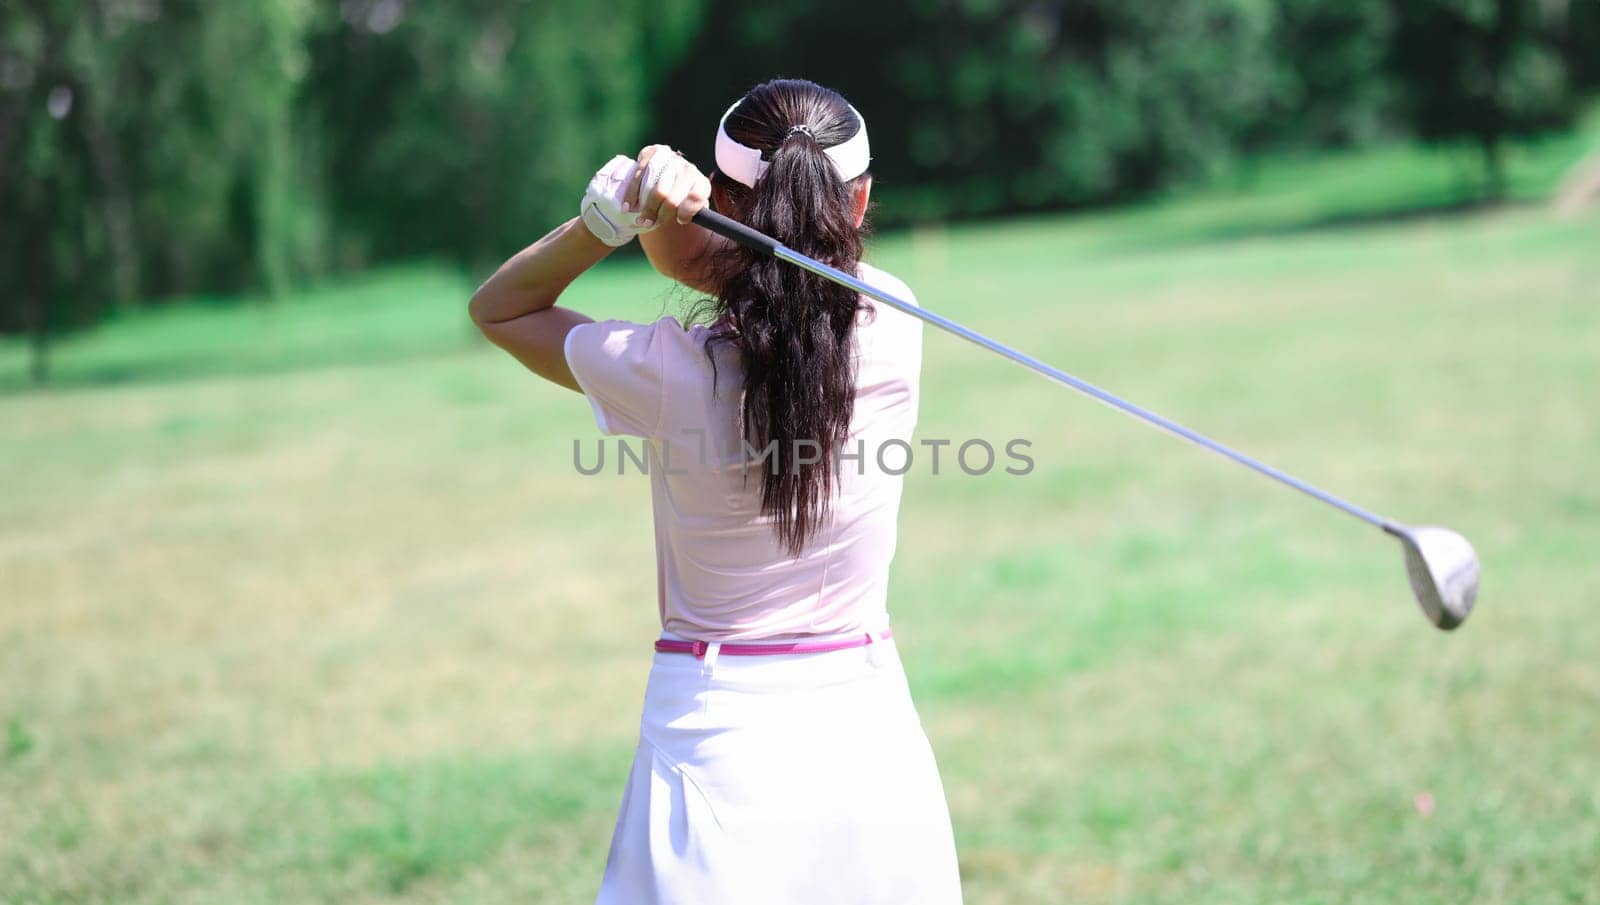 Woman in suit hold golf club behind her back. Back view of person playing golf on green lawn.